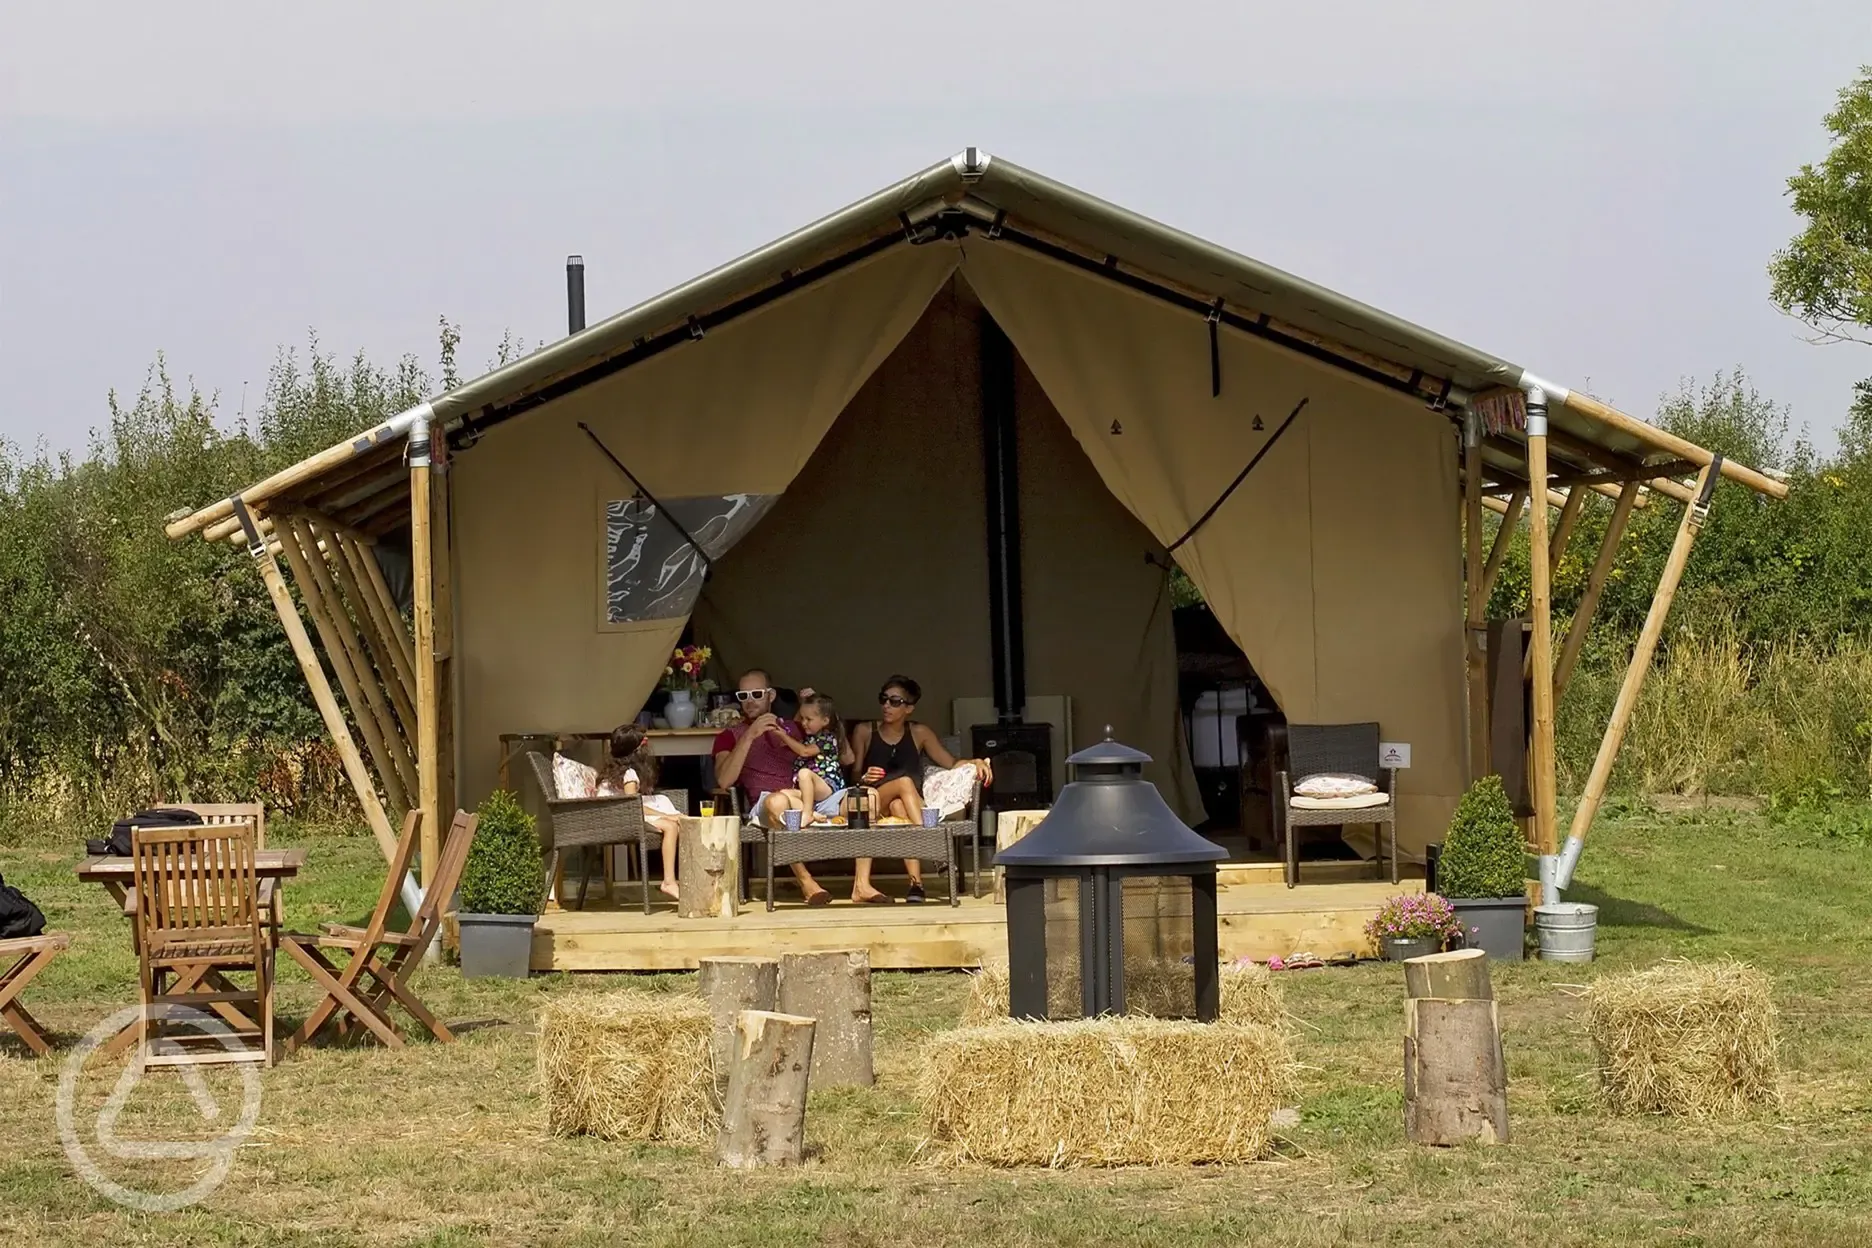 Large Self-contained Safari Tents with all the comforts to enjoy the outdoors